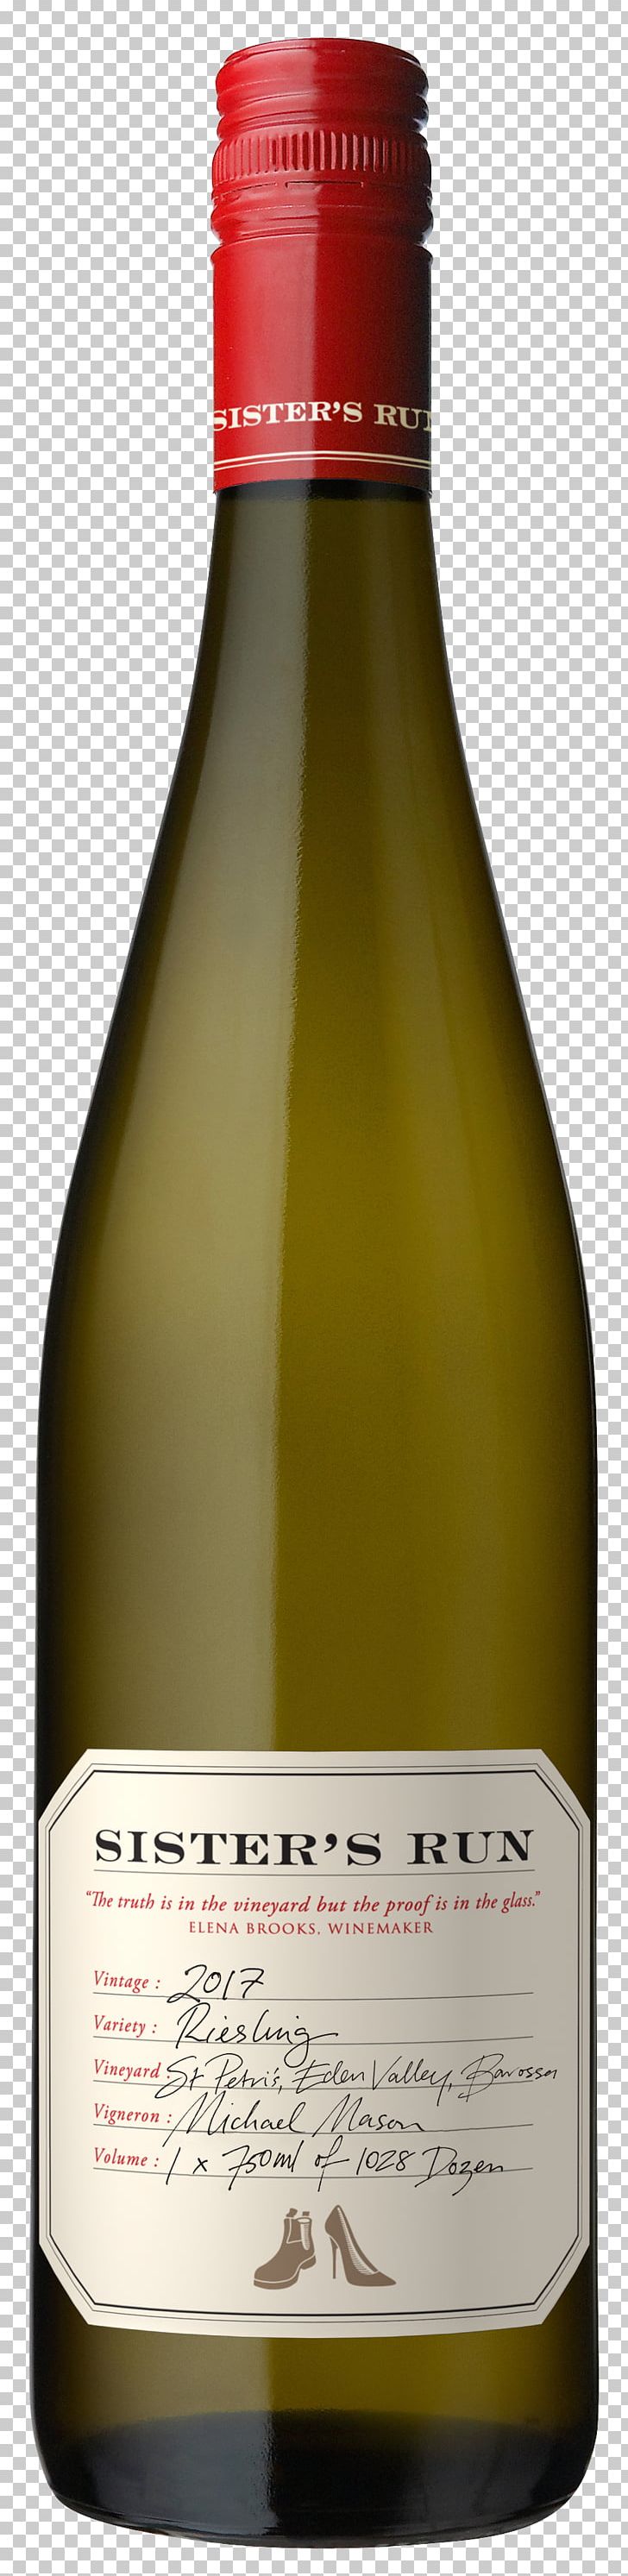 Eden Valley Riesling White Wine Champagne PNG, Clipart, Alcoholic Beverage, Barossa Valley, Barrel, Bottle, Champagne Free PNG Download